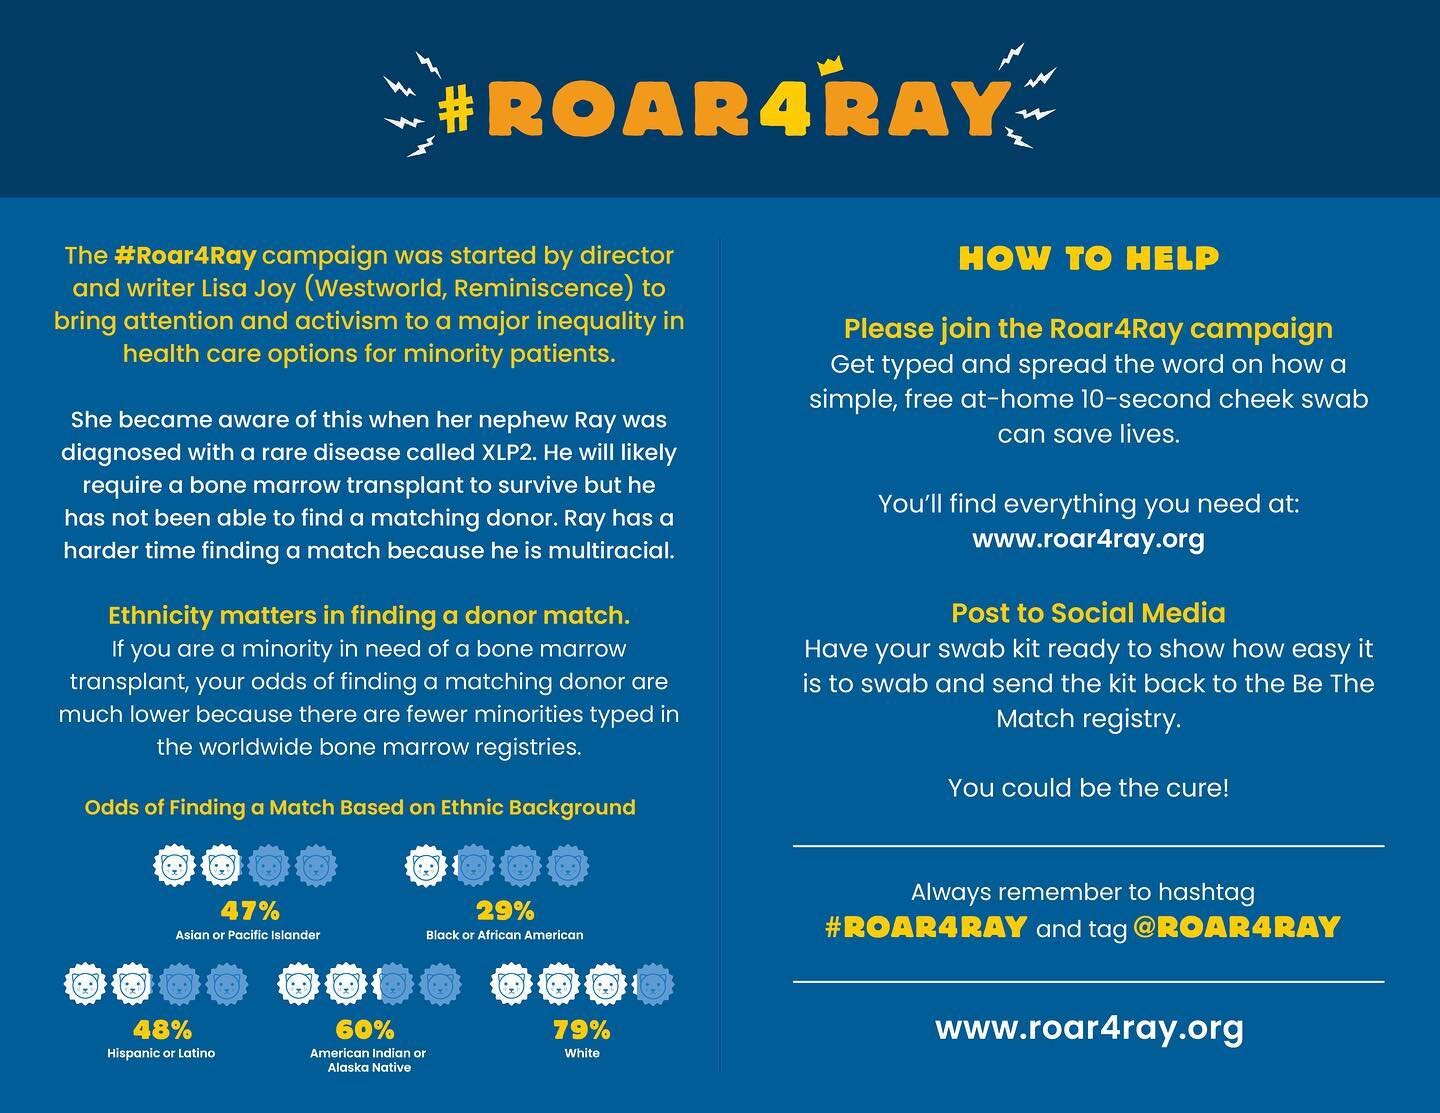 Everything you need to know about #Roar4Ray. Zoom in for a closer look.

We decided to compile all the most important information from our website into one shareable resource for you.

We encourage you to share this with your friends, family, and soc